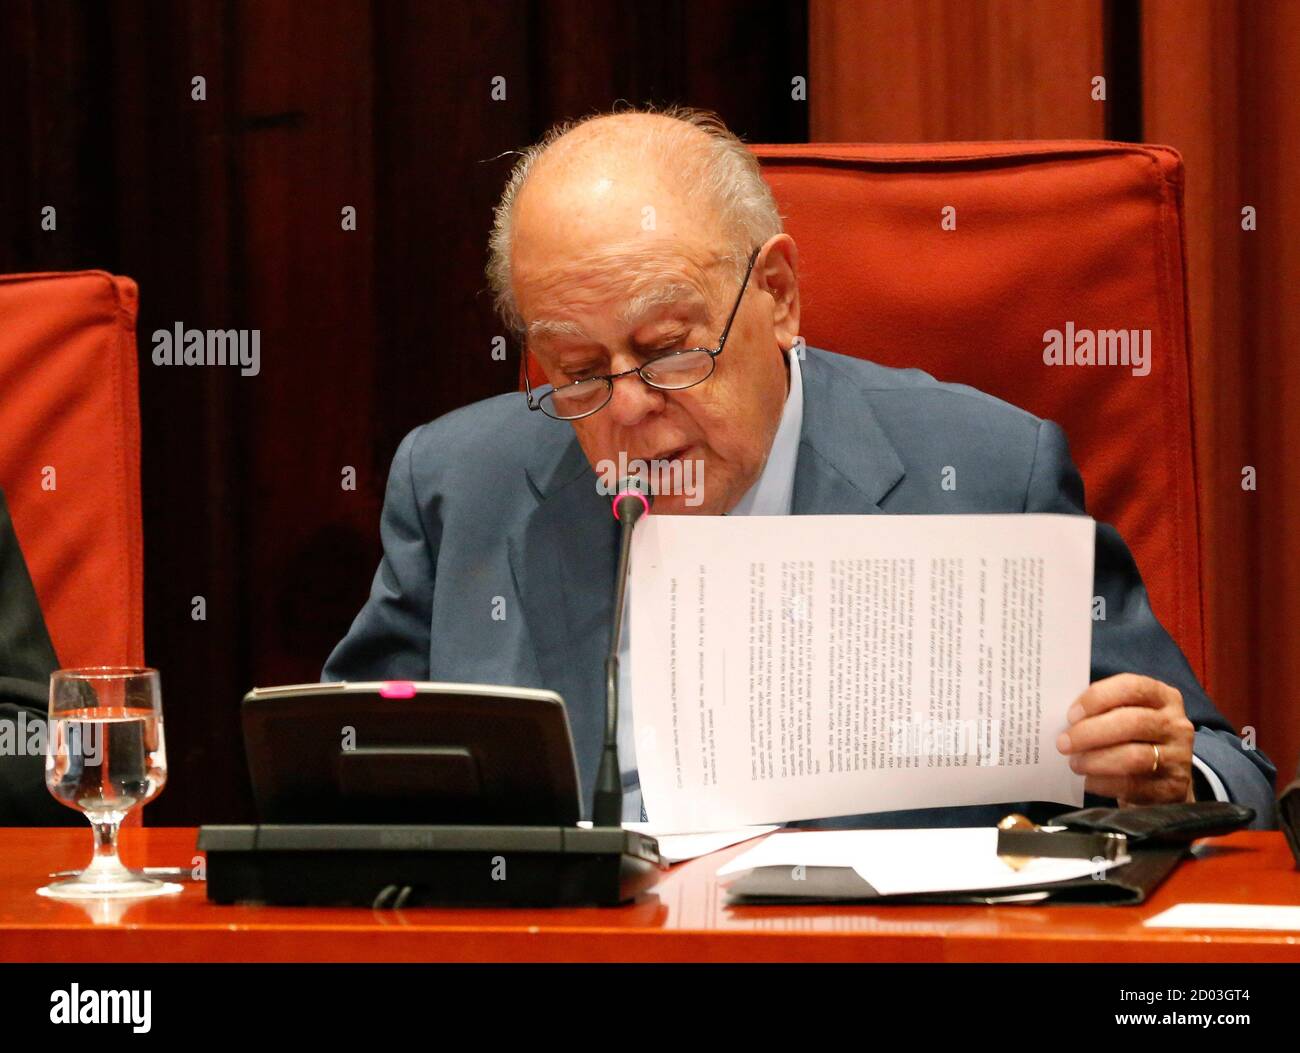 Catalonia's former president Jordi Pujol speaks at Catalonia's parliament  in Barcelona September 26, 2014. Pujol, who is currently being investigated  by the anti-corruption prosecutor's office, told the parliament on Friday  he had